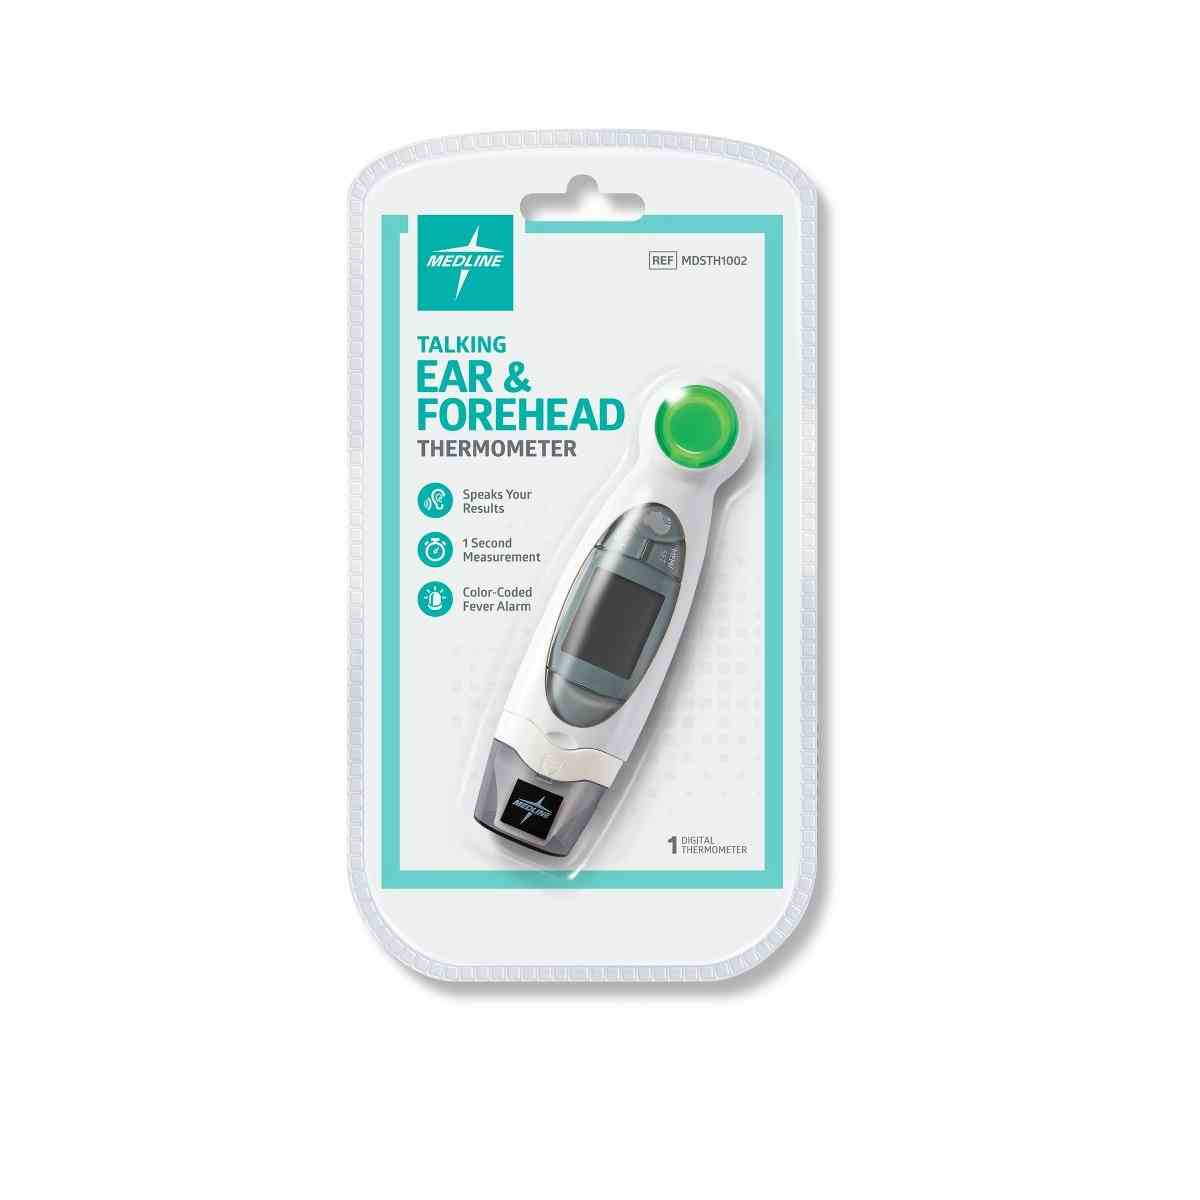 Medline Talking Ear and Forehead Home Thermometer, MDSTH1002, 1 Each